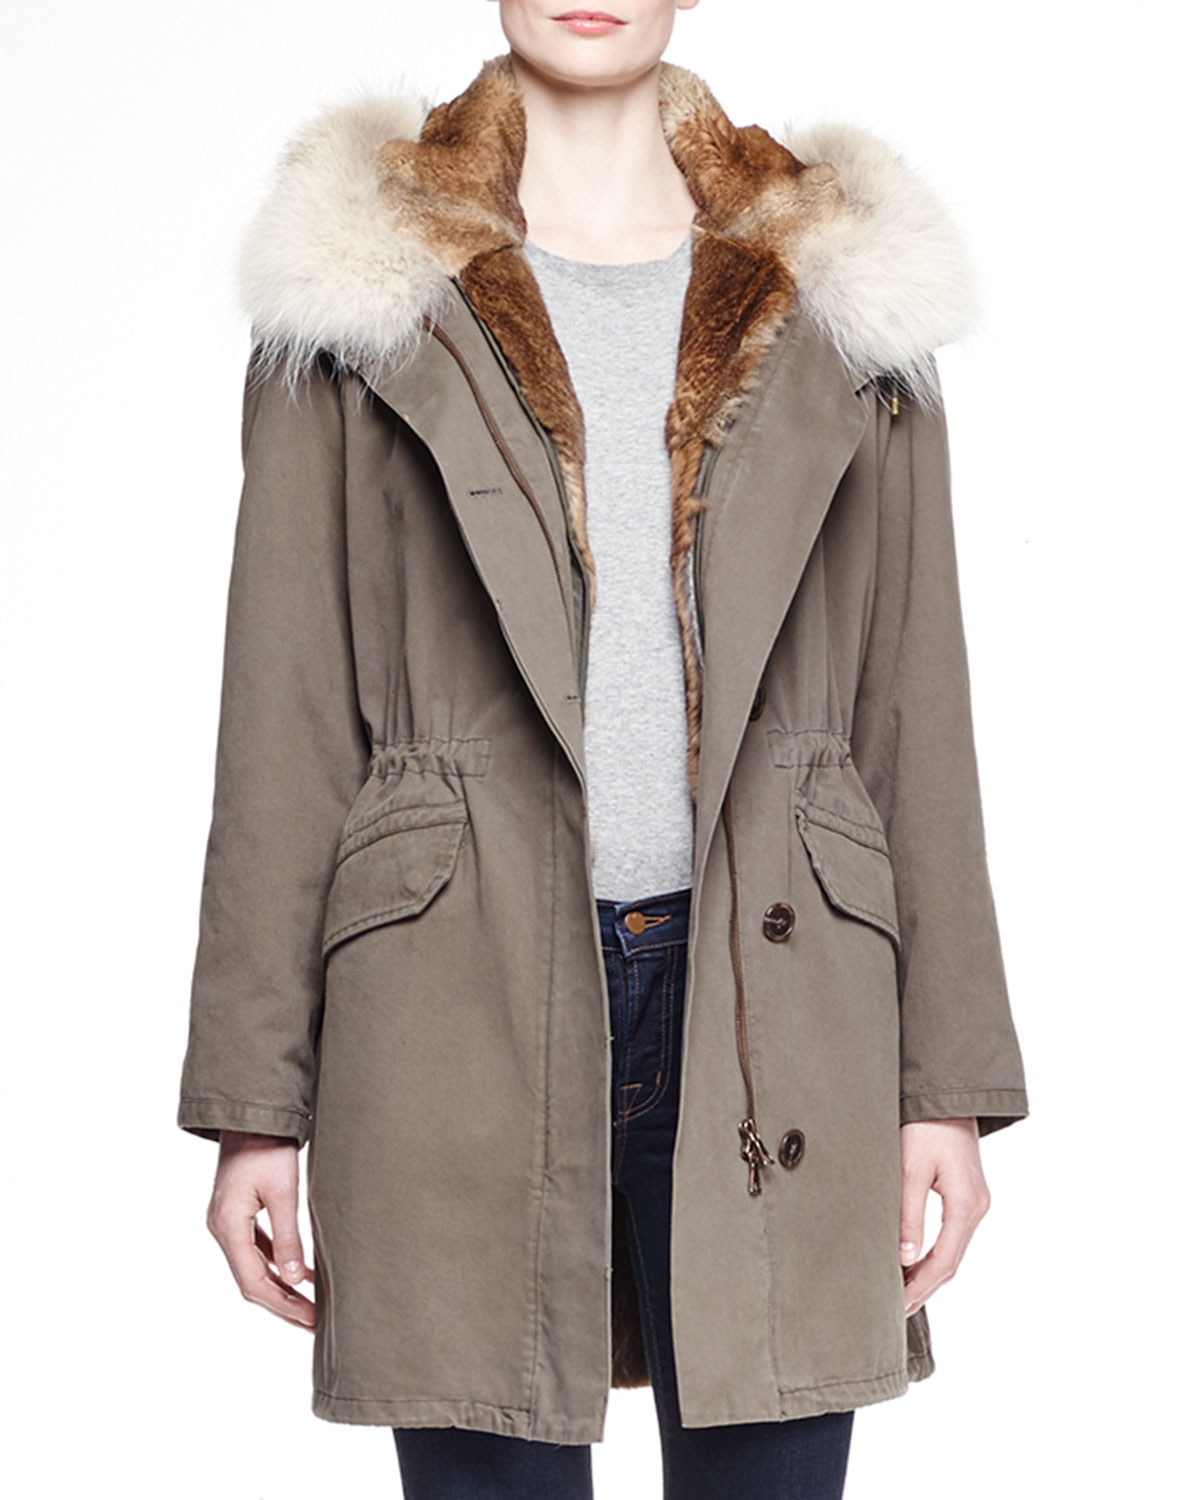 Lyst - Army By Yves Salomon Parker Coyote-Fur-Lined Coat in Green